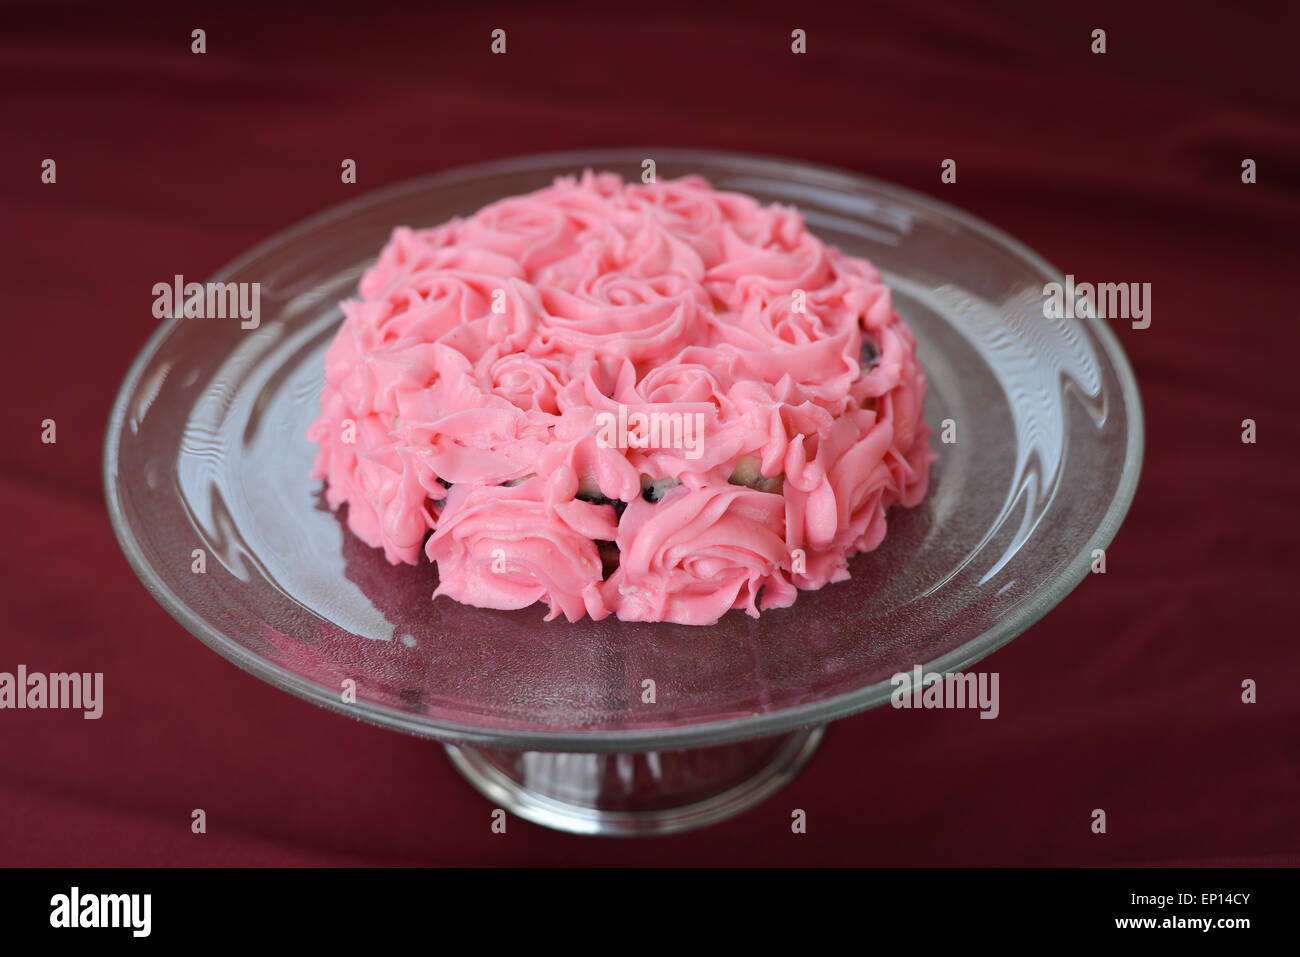 Deliciously Decorated Pink Rose Frosting Cake On A Glass Plate Stock Photo